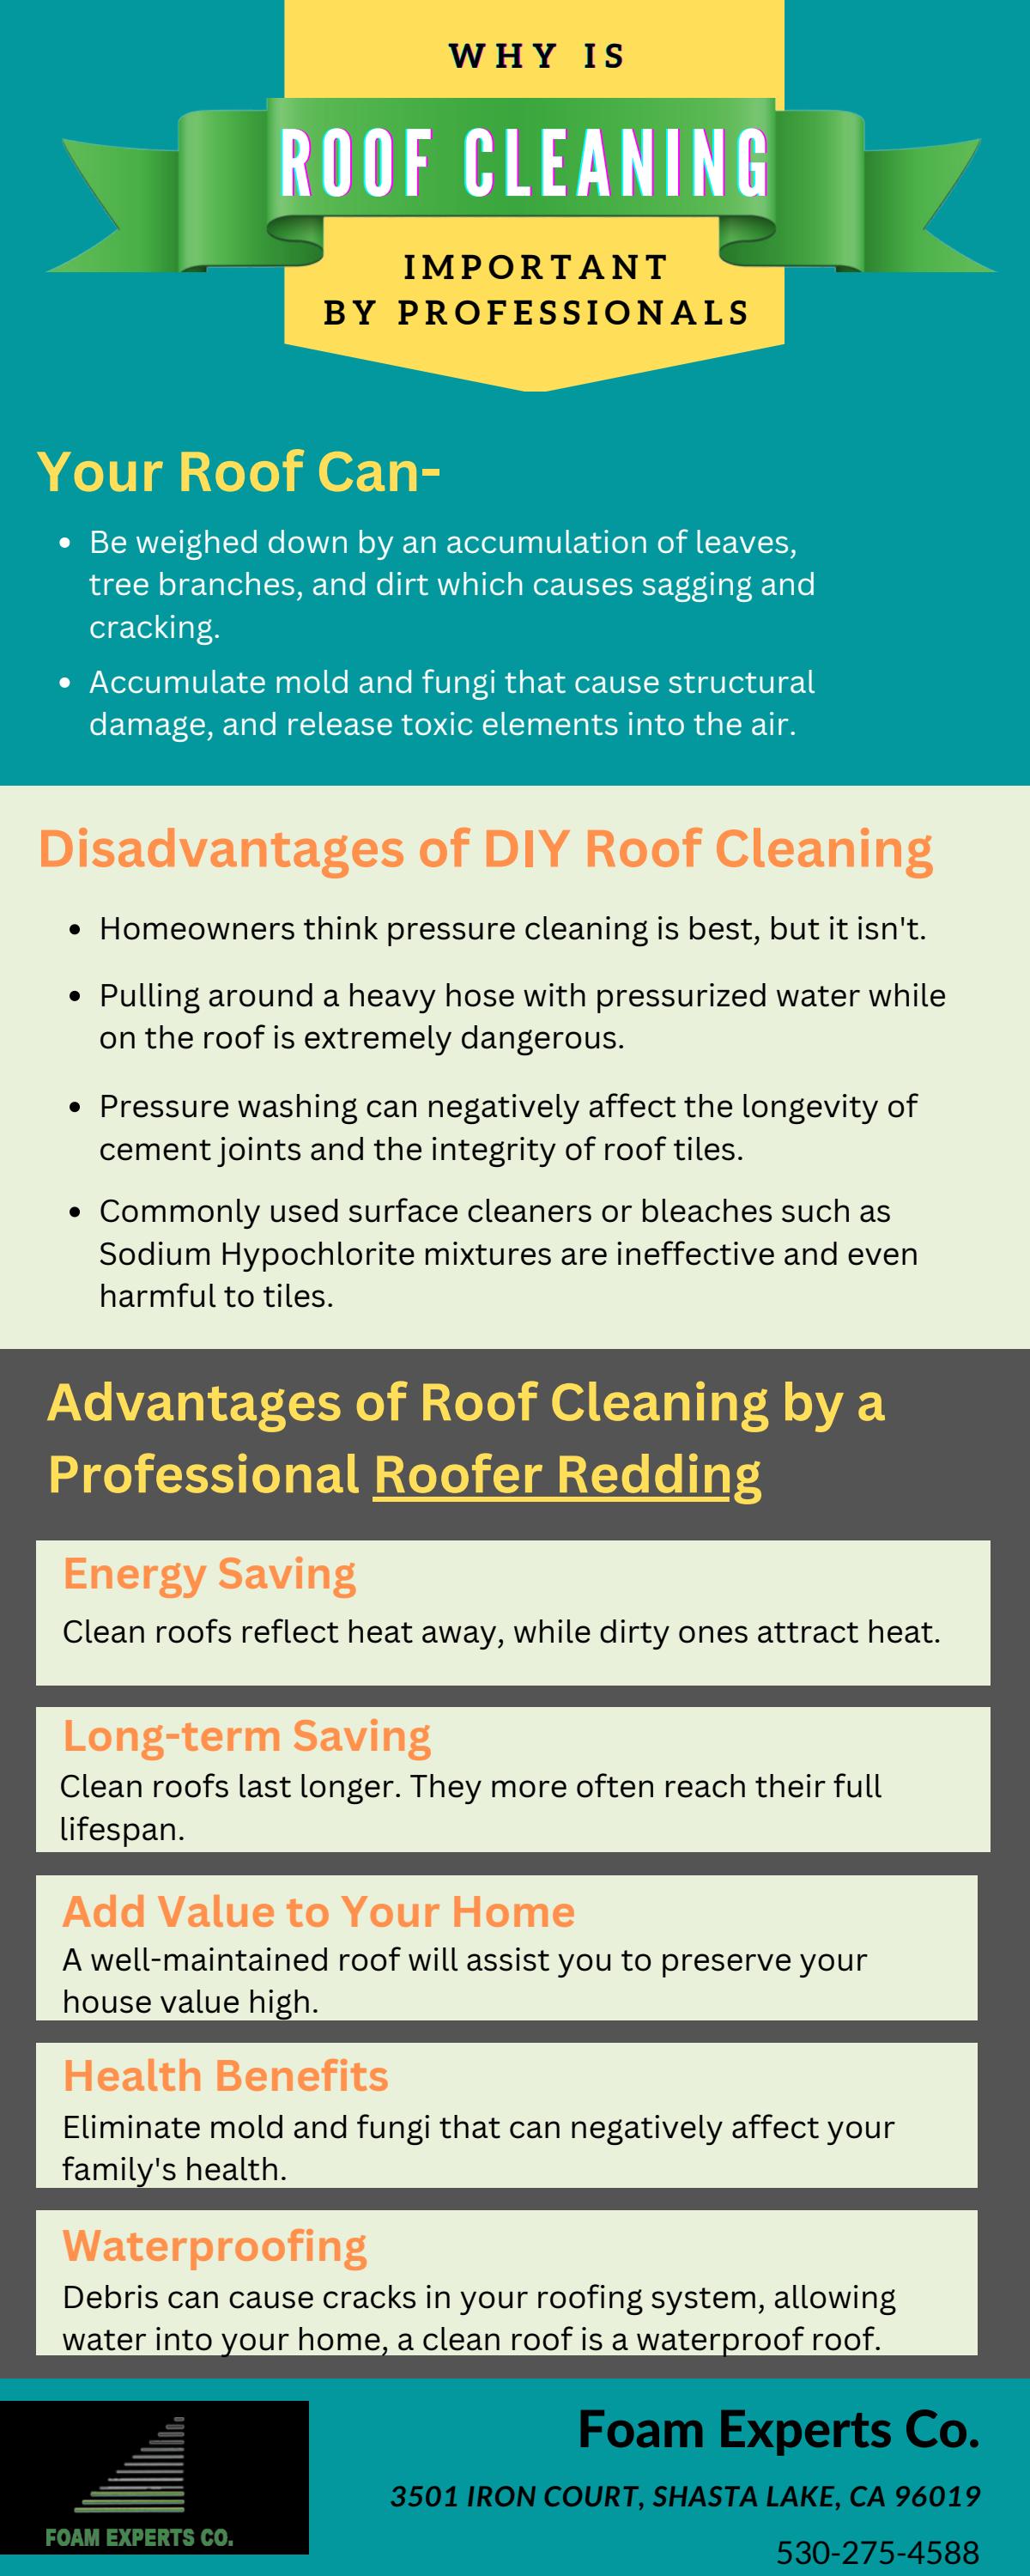 Why Is Roof Cleaning  Important by Professionals